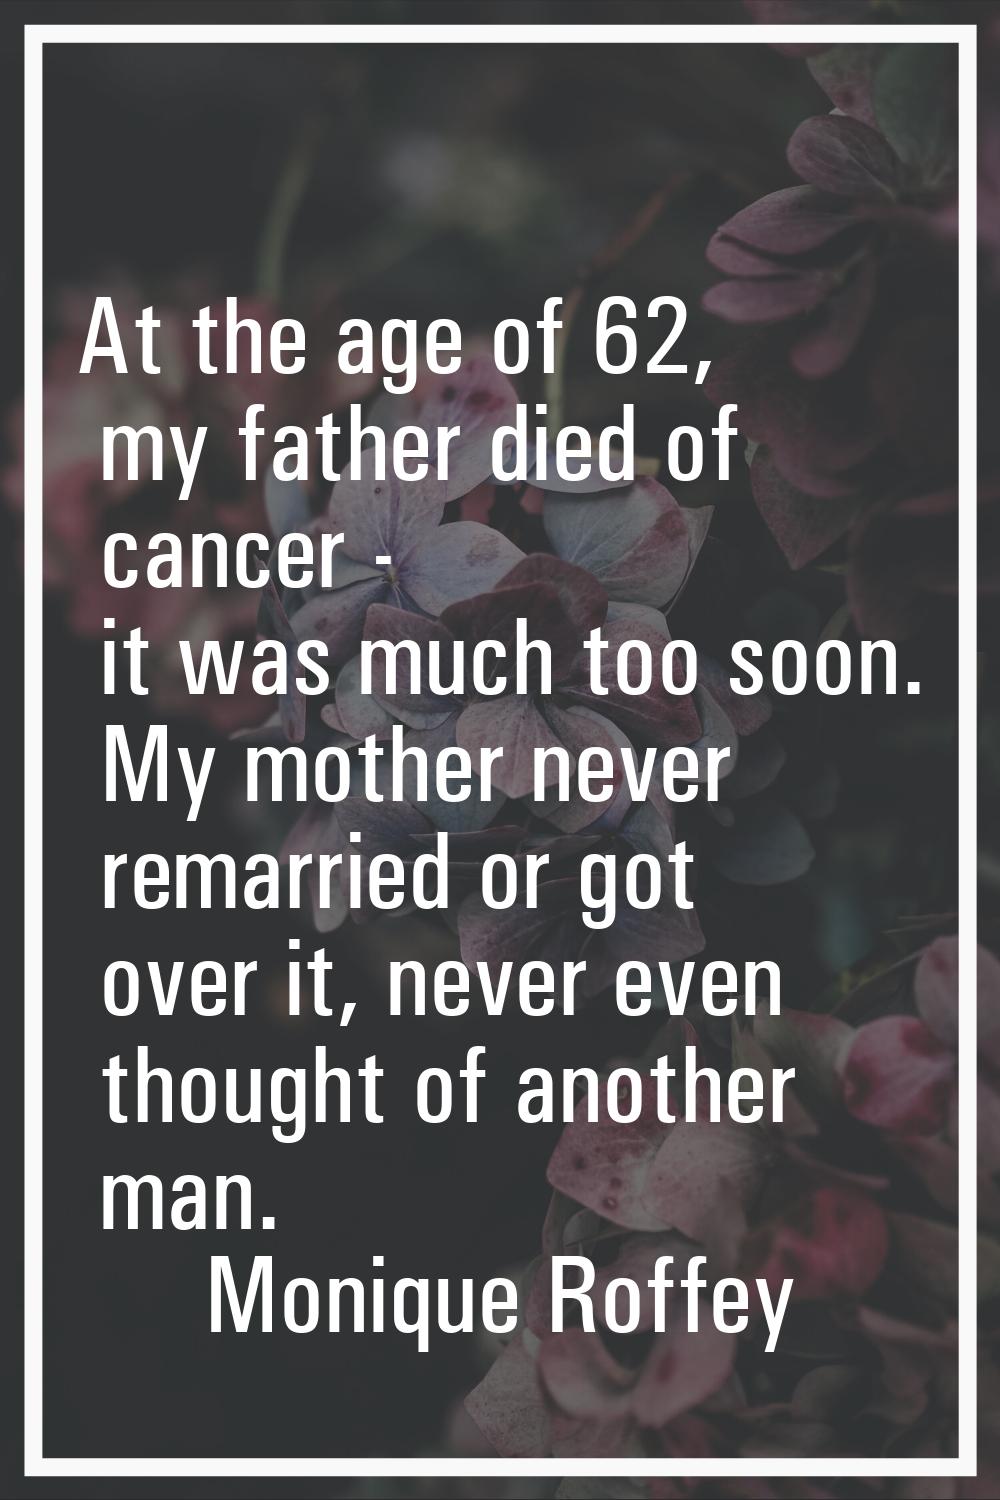 At the age of 62, my father died of cancer - it was much too soon. My mother never remarried or got